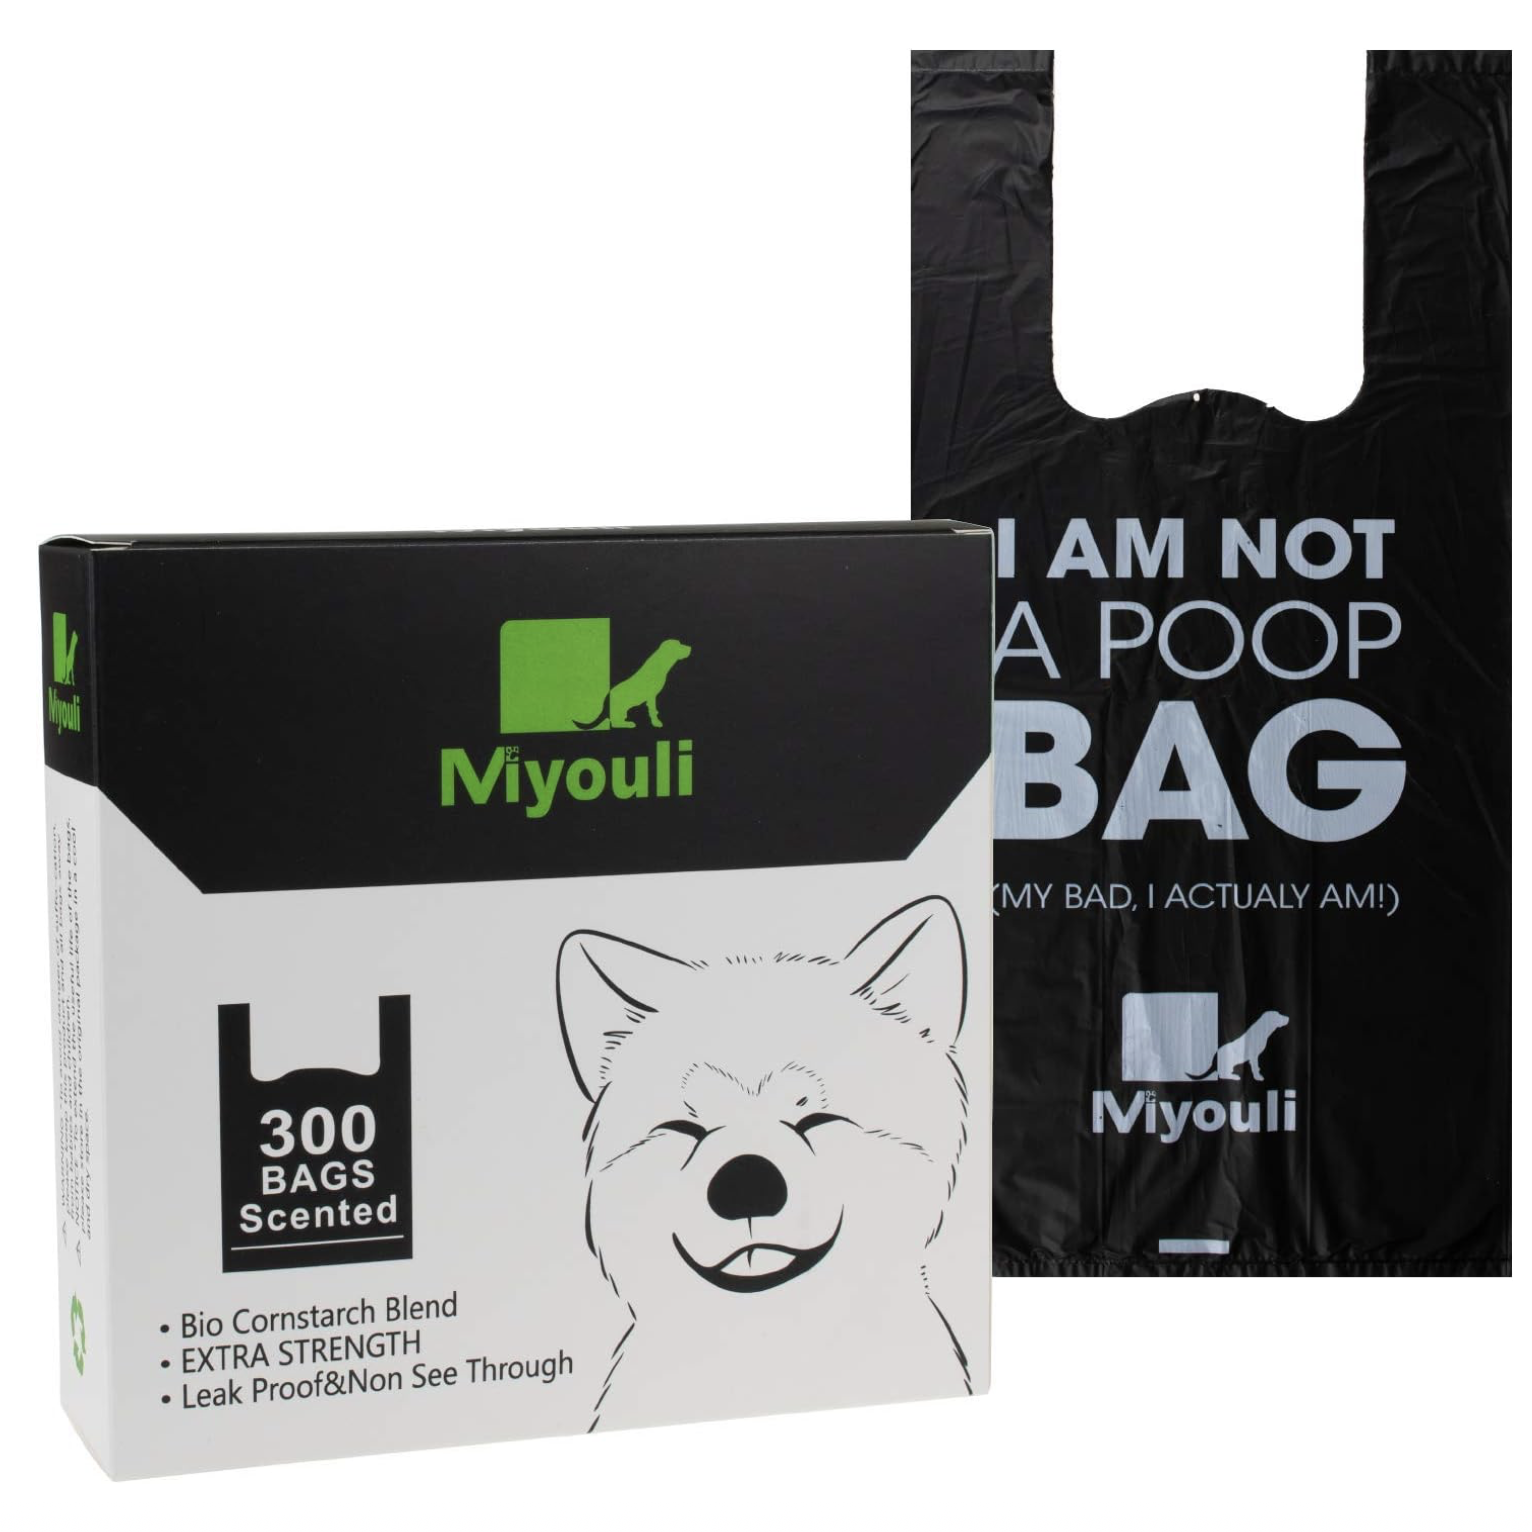 300 black scented waste bags for pet walking